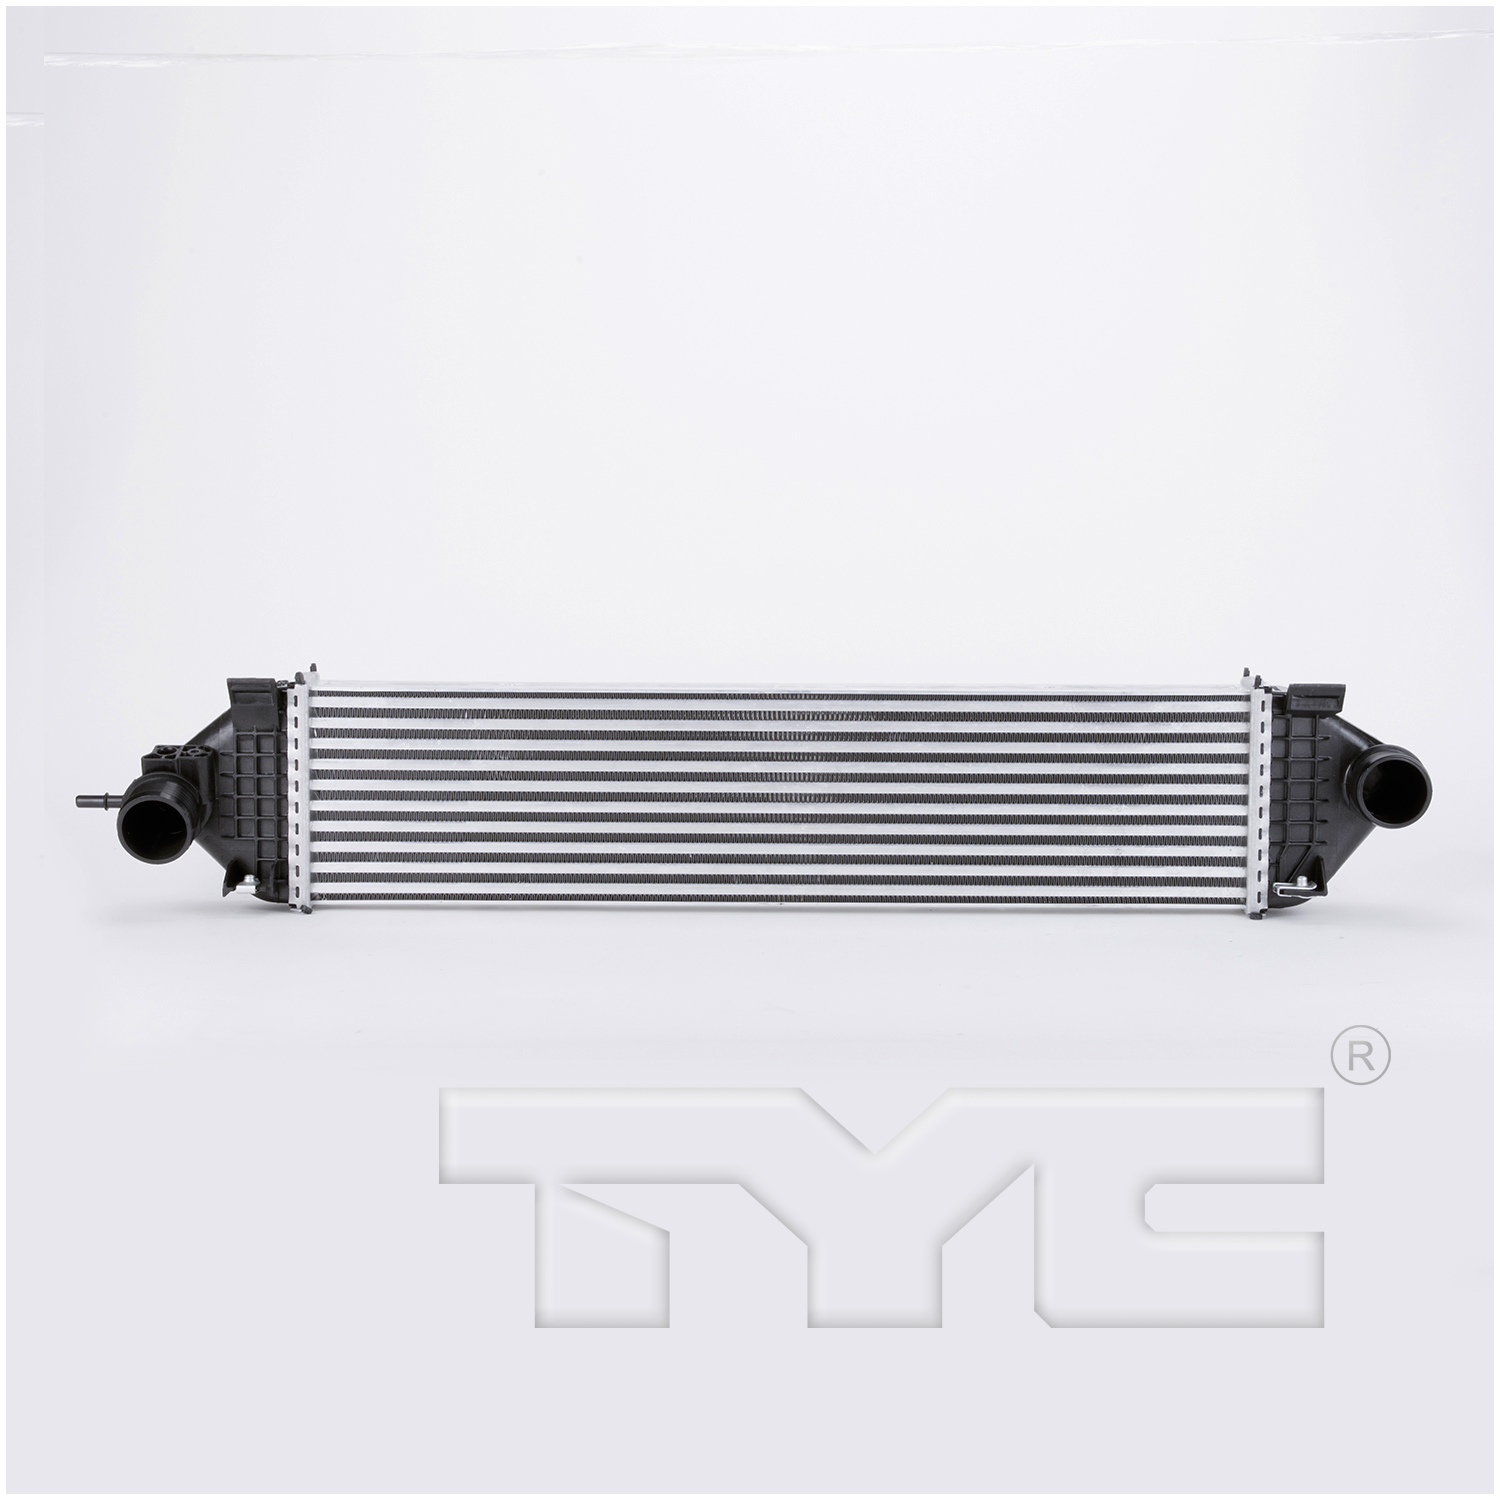 Aftermarket RADIATORS for FORD - TRANSIT CONNECT, TRANSIT CONNECT,14-18,Intercooler assy